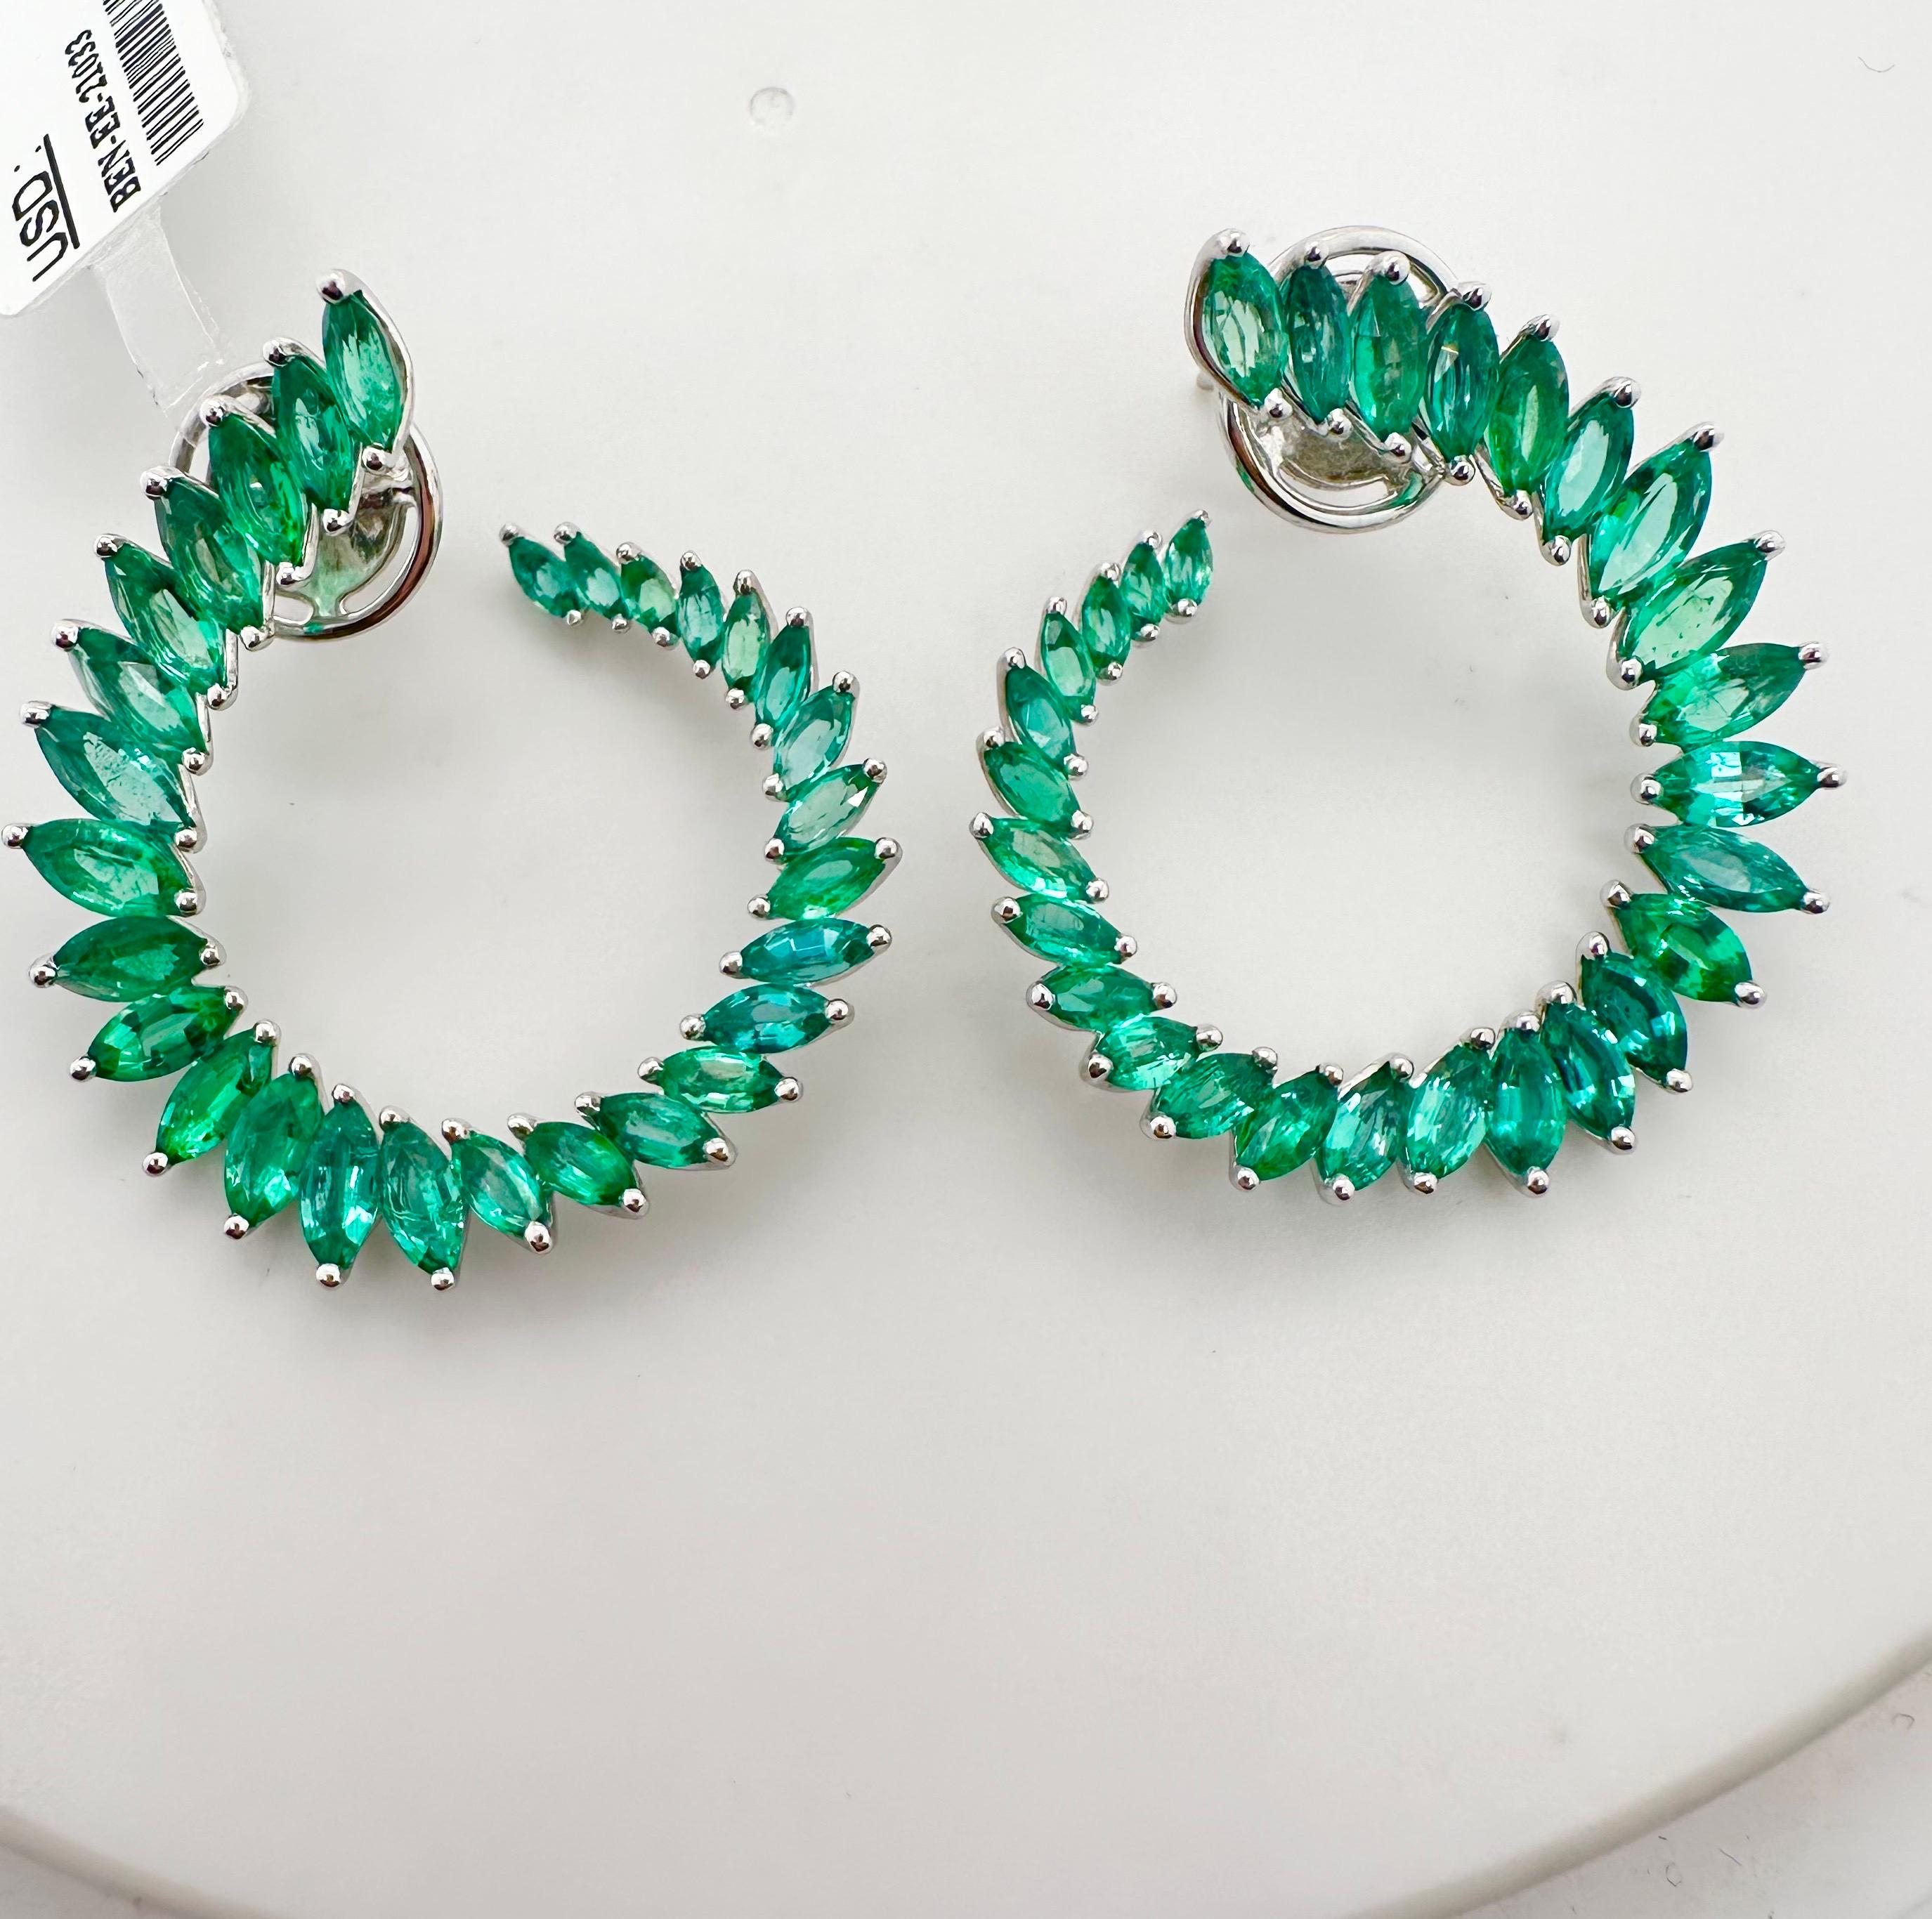 Rare emerald hoop earrings in 18KT white gold, made to perfection with Colombian green emeralds and looks absolutely glamorous and sparkly! Comes with certificate of authenticity for emeralds and the earrings.


ABOUT US
We are a family-owned